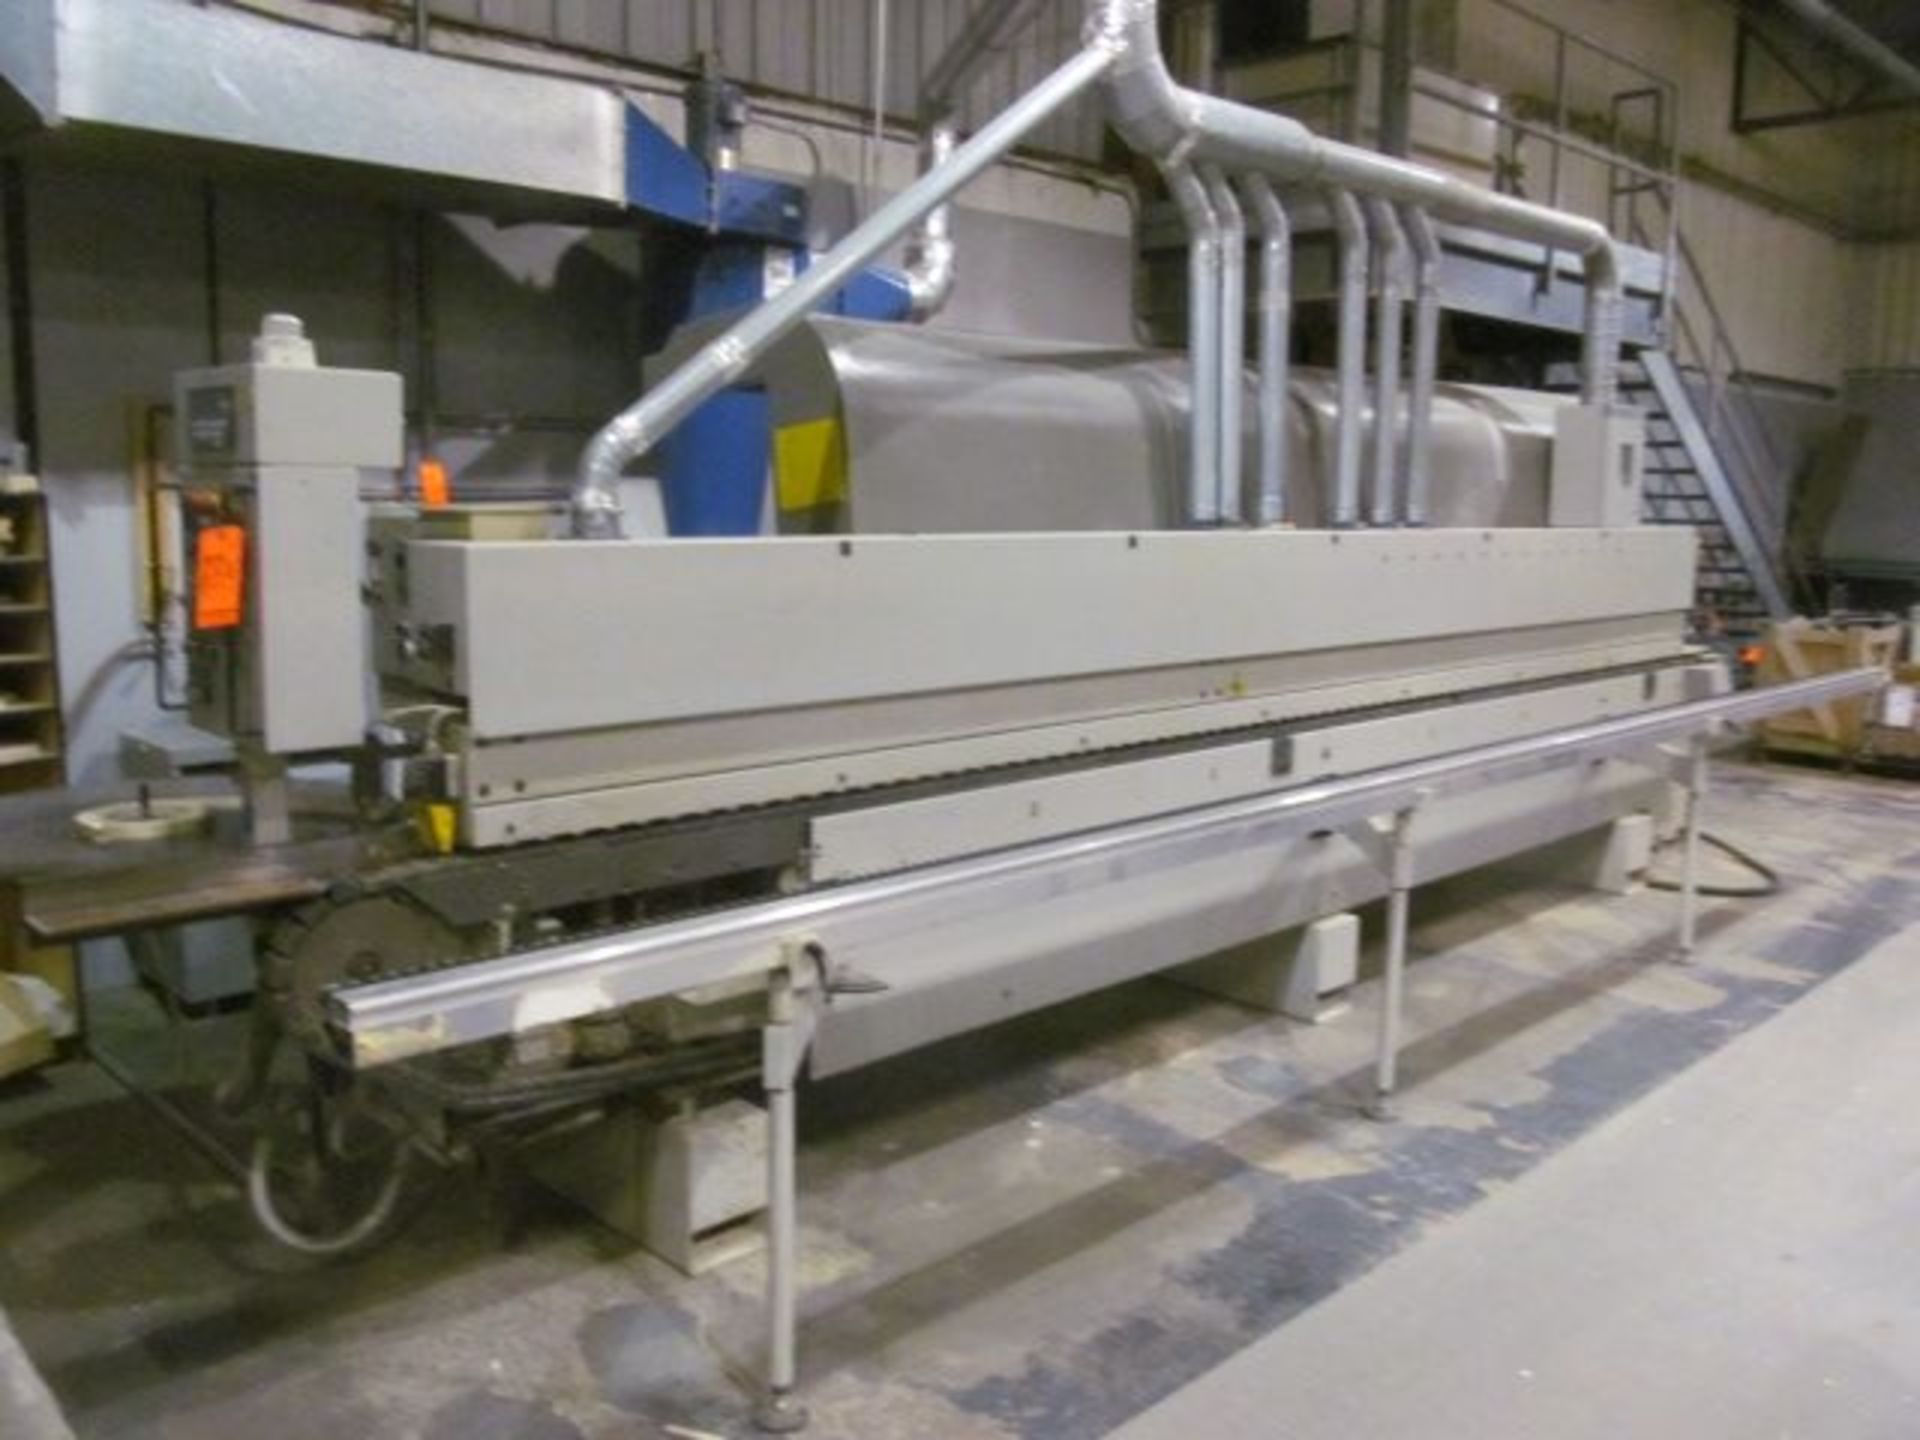 1997 IDM Idimatic edge bander, M/N AL/003930, with 16-drawer cabinet and contents, ass't edge bander